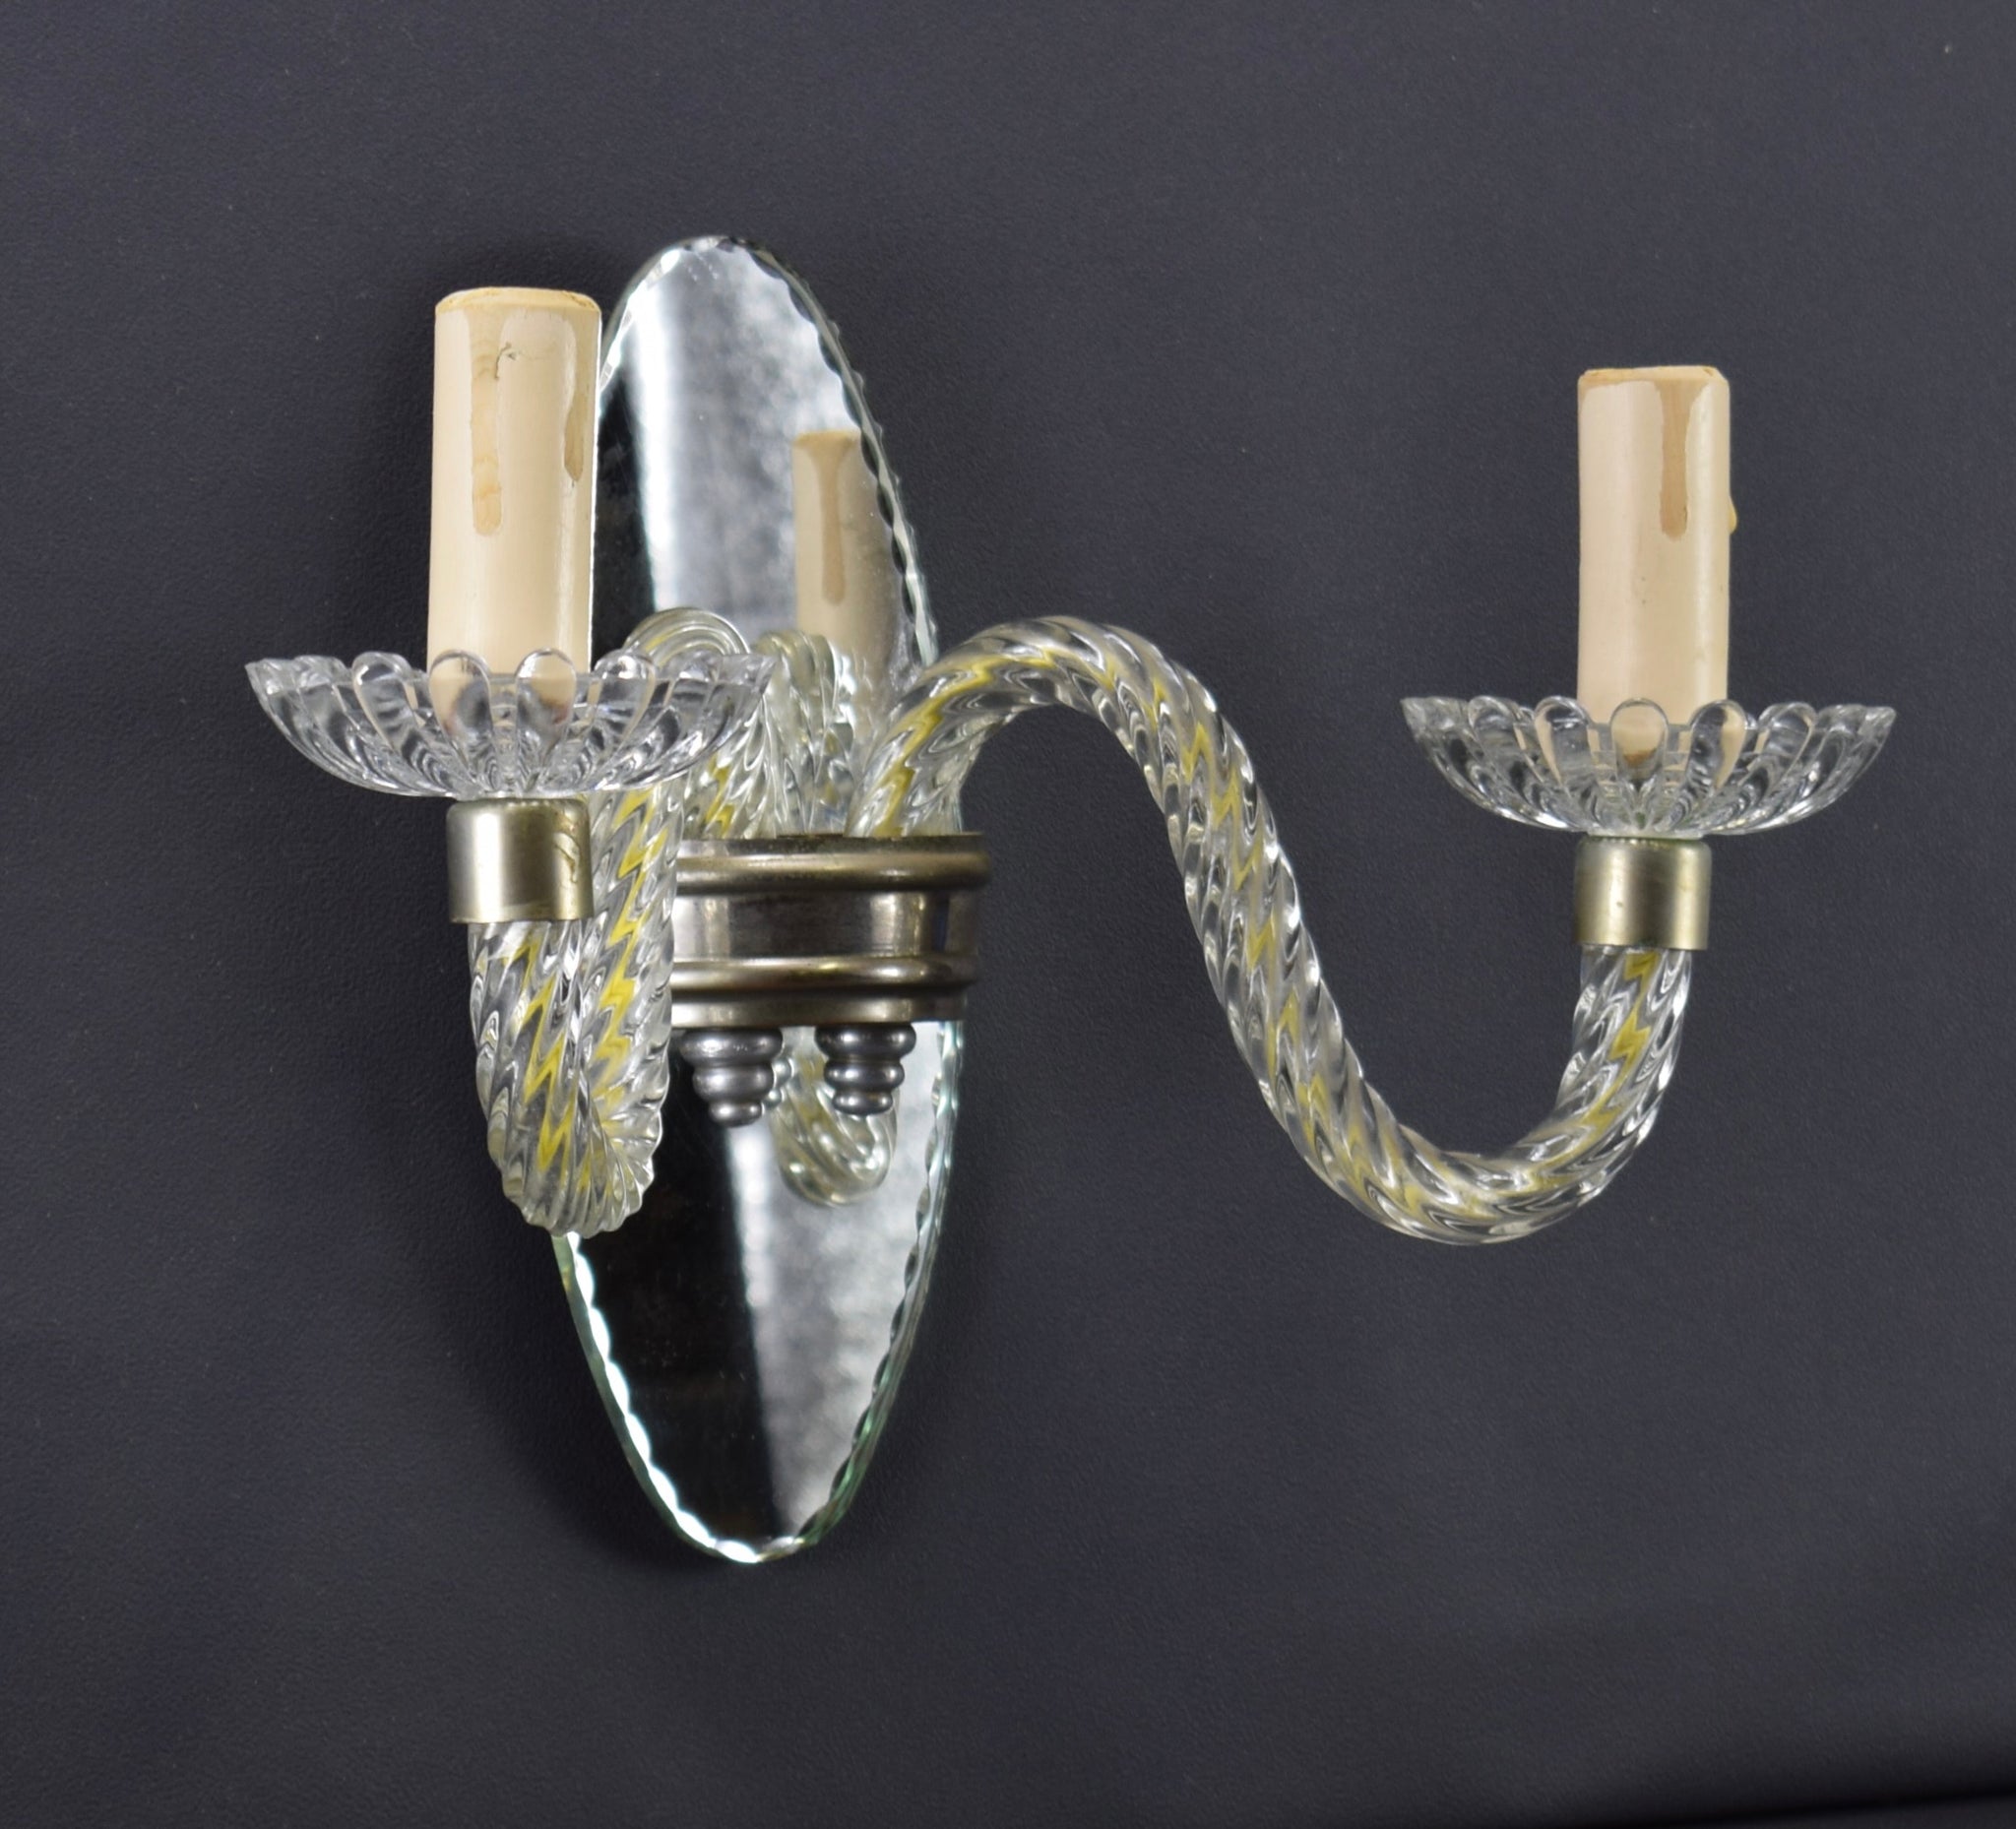 Twisted Arms Wall Sconce